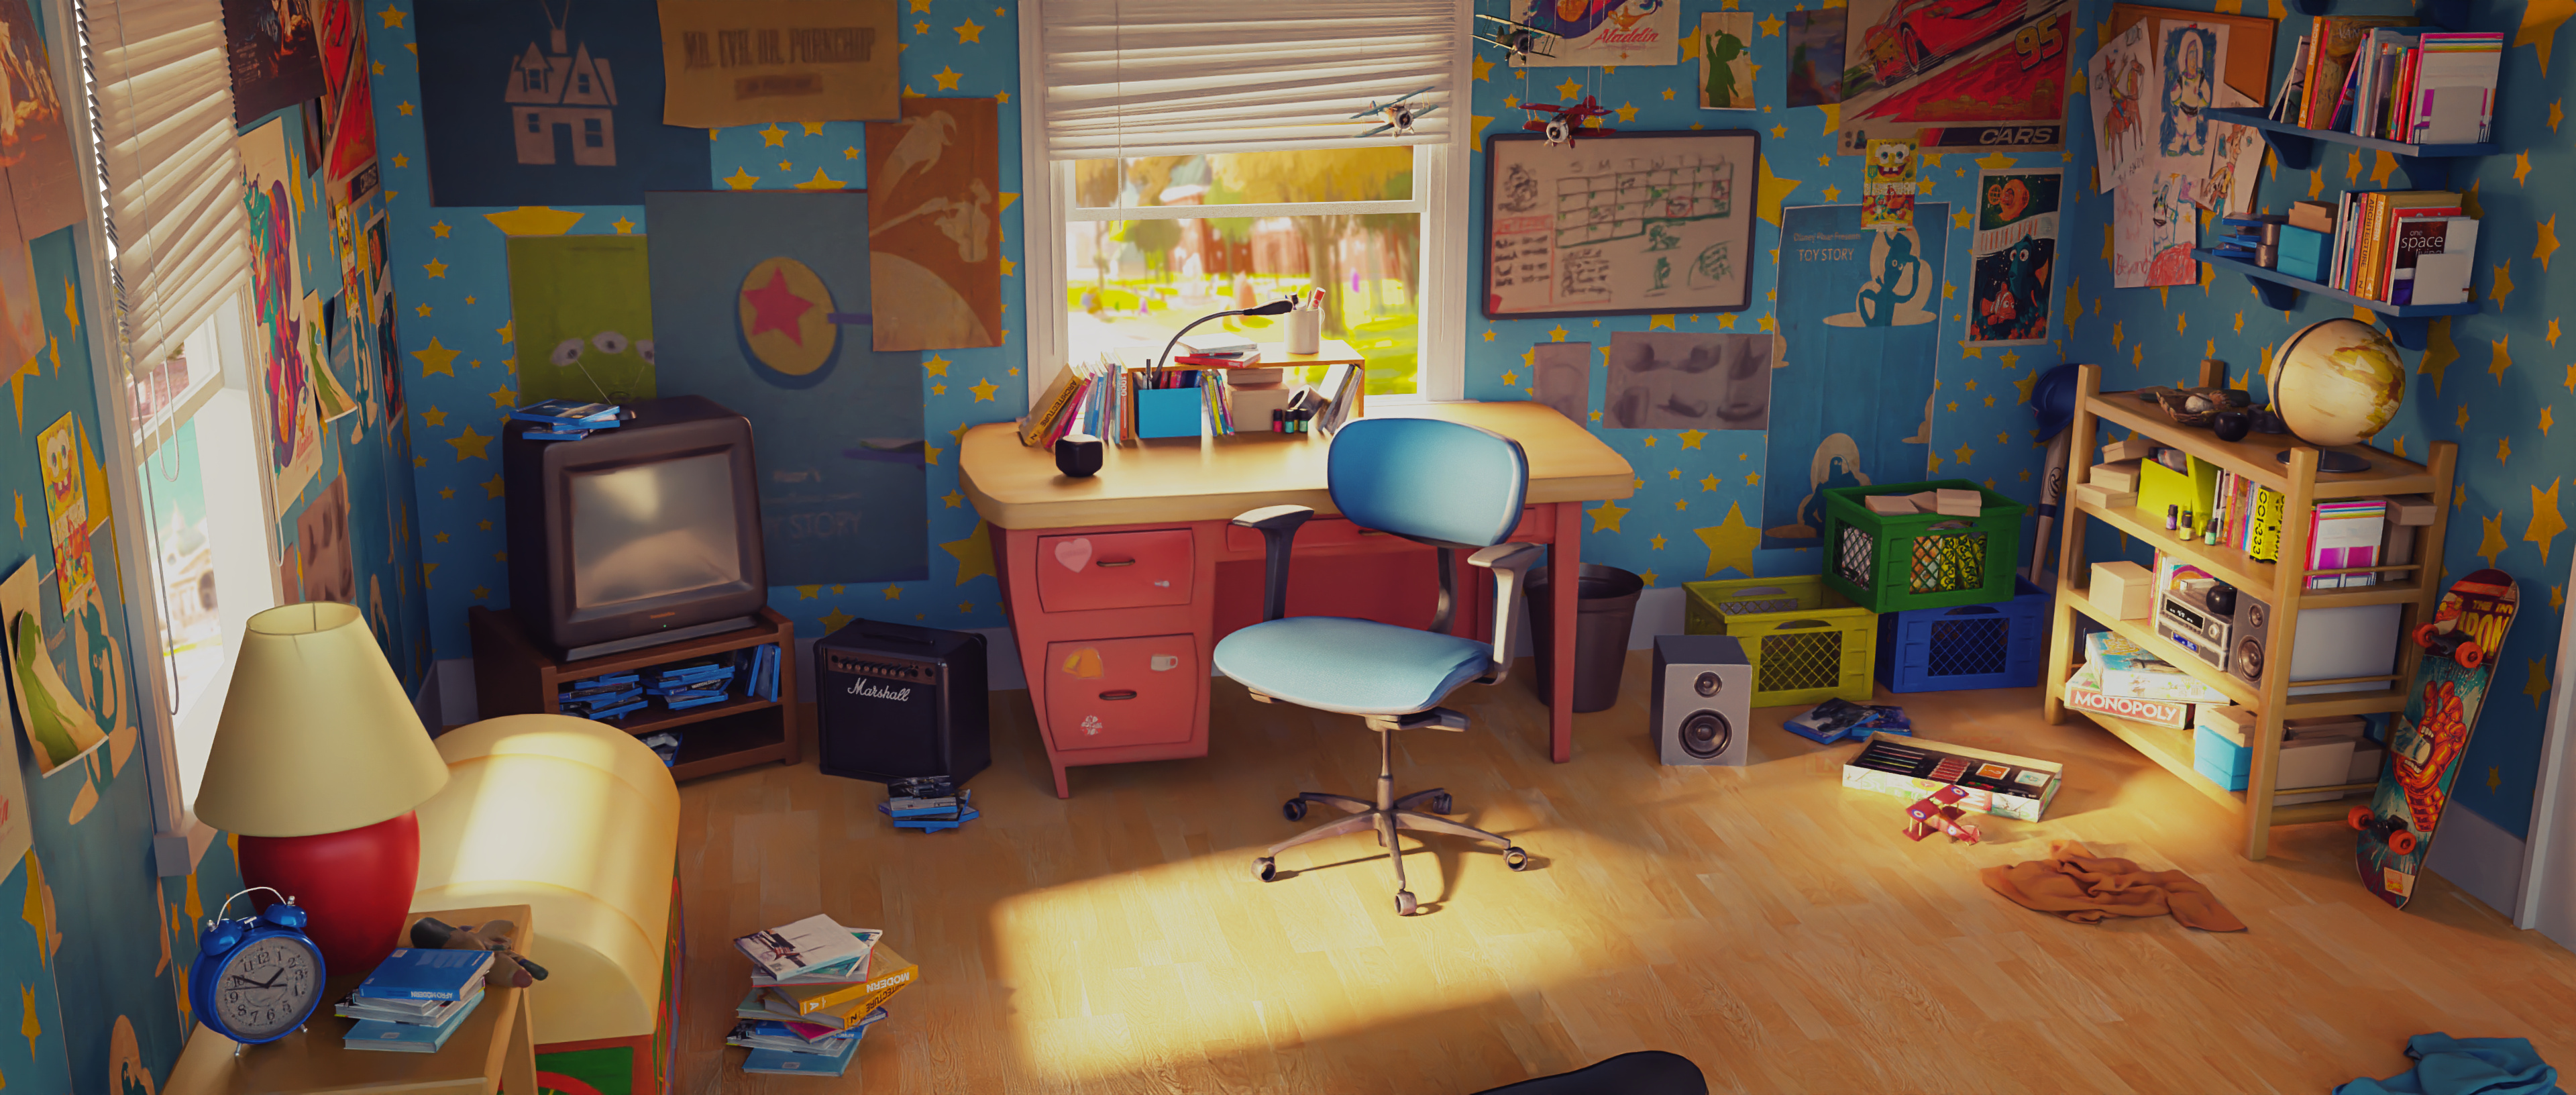 Toy Story Andy S Room Finished Projects Blender Artists Community